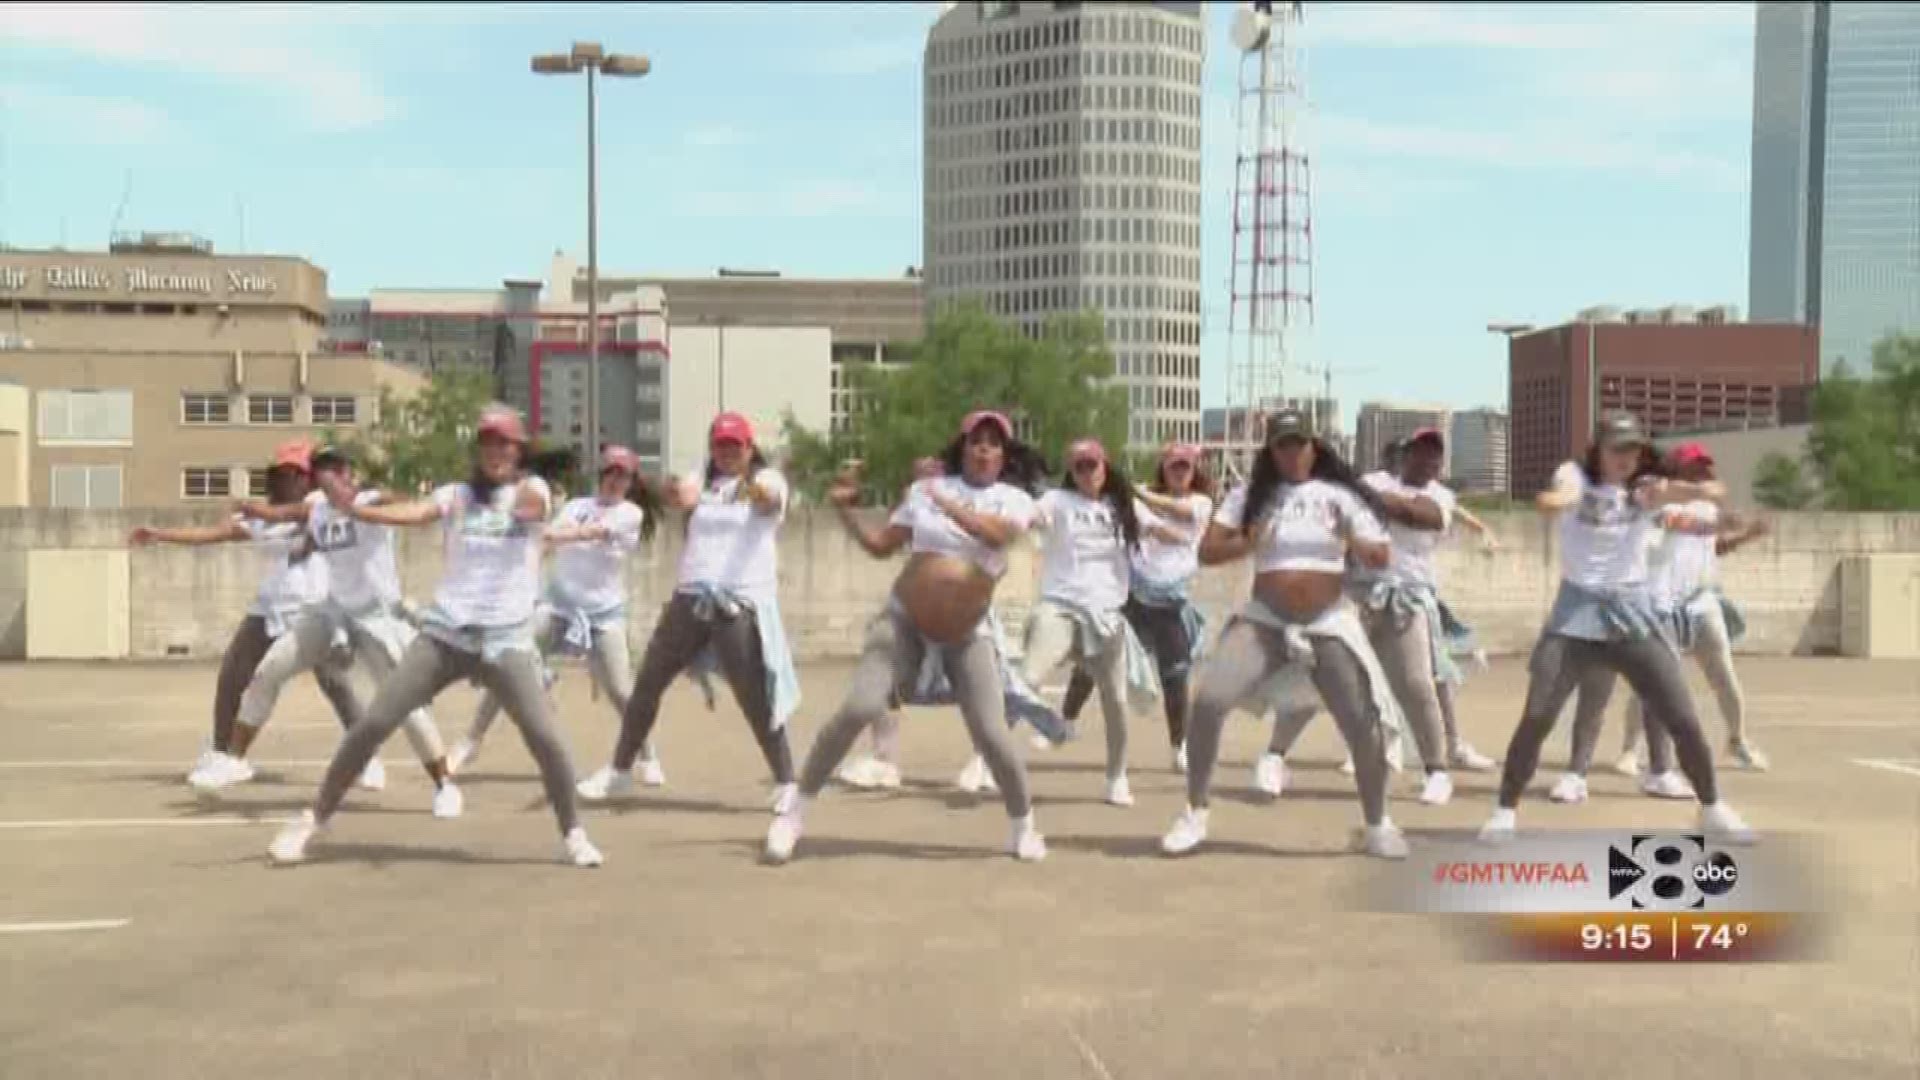 Hip hop mom dance group in Dallas